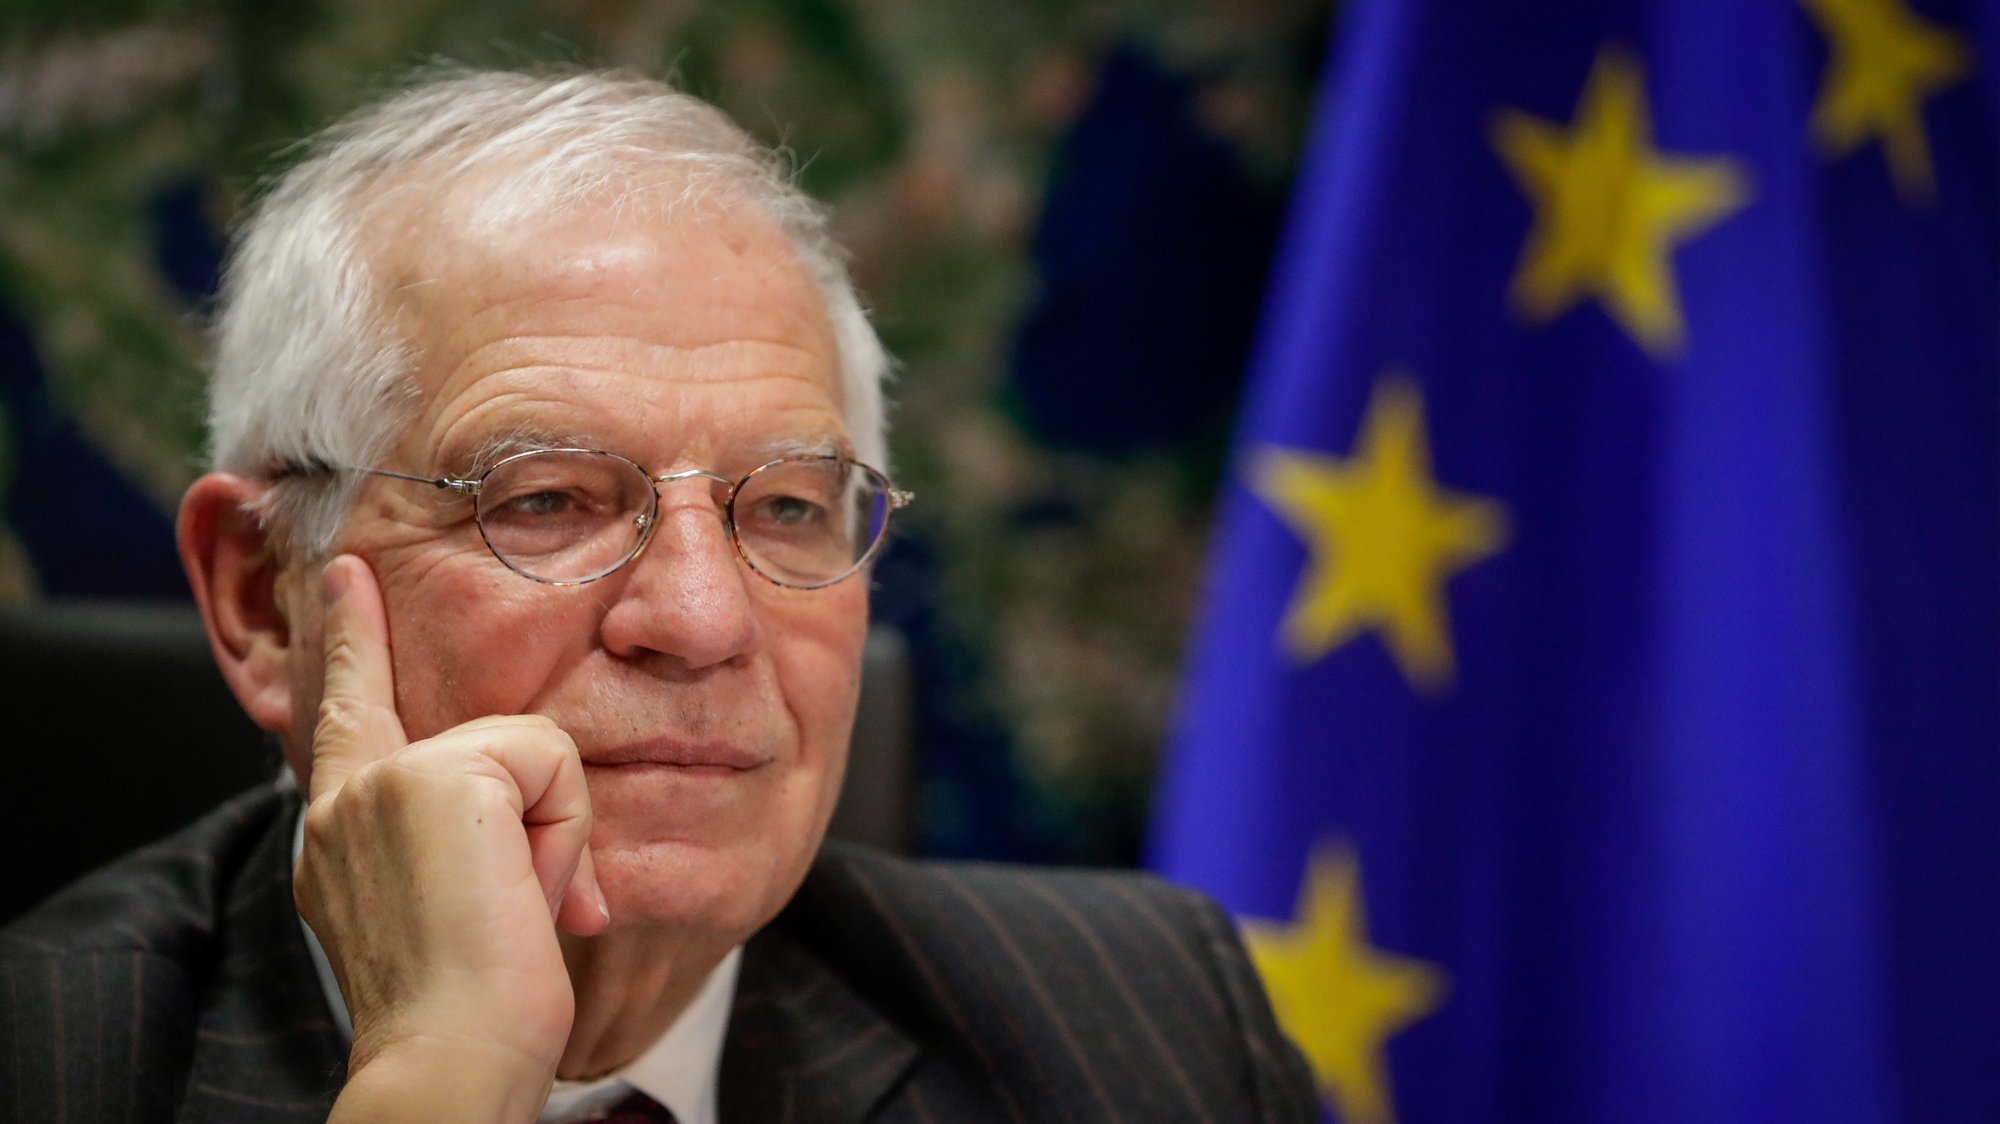 epa08889378 High Representative of the European Union for Foreign Affairs and Security Policy Josep Borrell, speaks during an interview with EFE, via videoconference in Brussels, Belgium, 16 December 2020 (issued 17 December 2020). Borrell is optimistic that there will be an exit deal for the UK. In his 34-year experience in European affairs, deals are always reached at the last minute and the price of a no-deal exit is too high to afford, he said.  EPA/Stephanie Lecocq